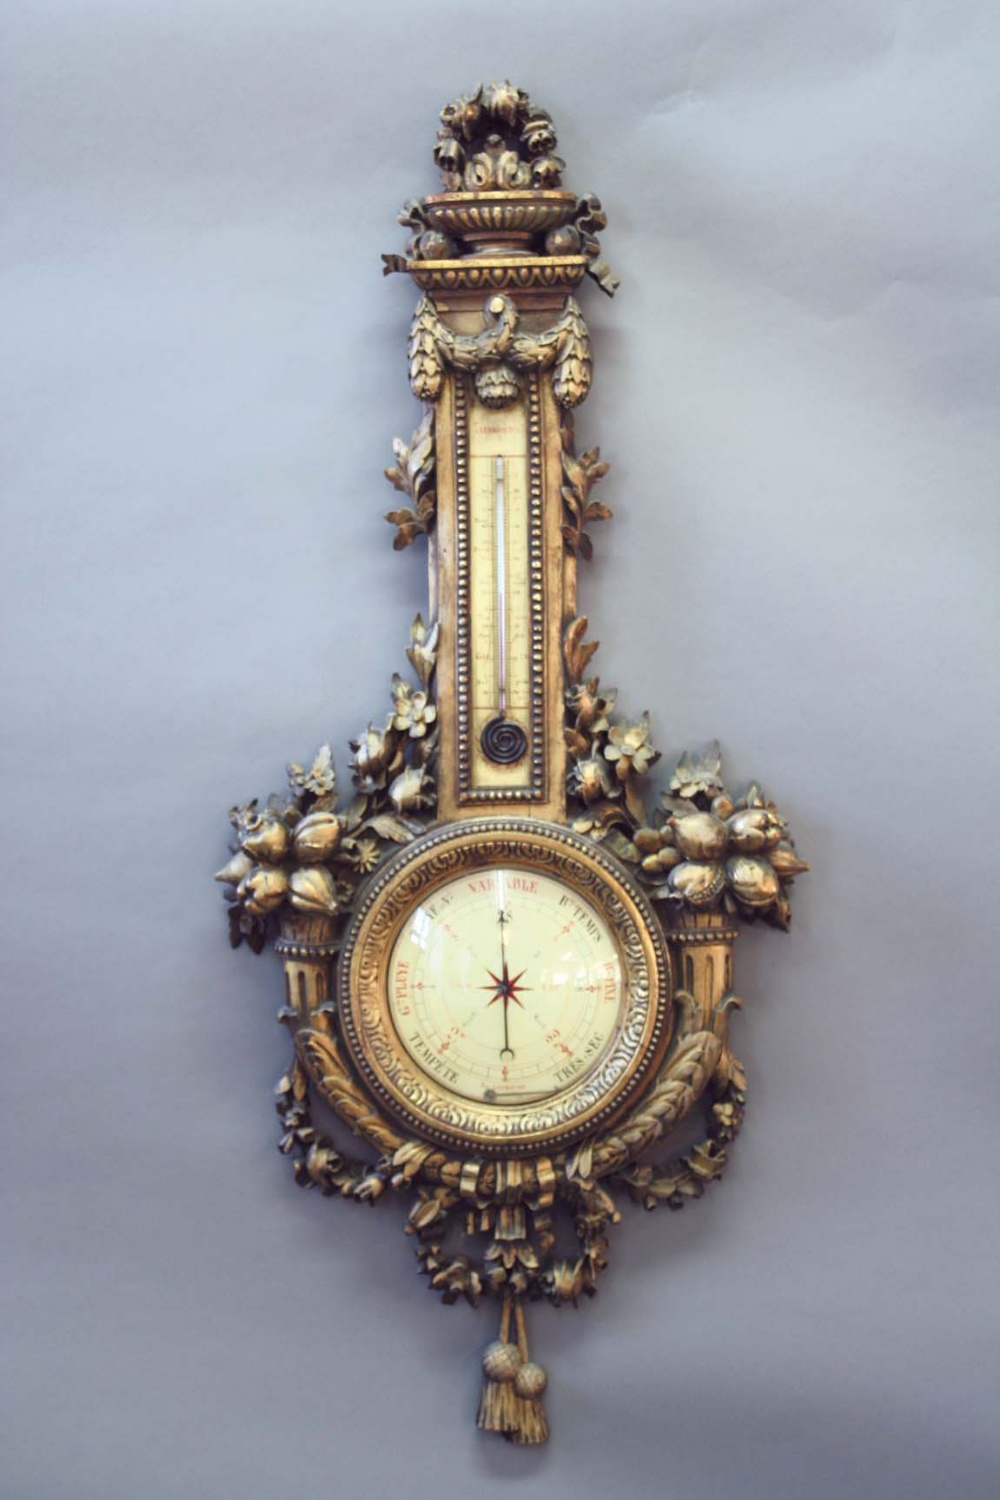 A LOUIS XVI STYLE GILTWOOD BAROMETER with a painted dial and scrolled alcohol thermometer, the